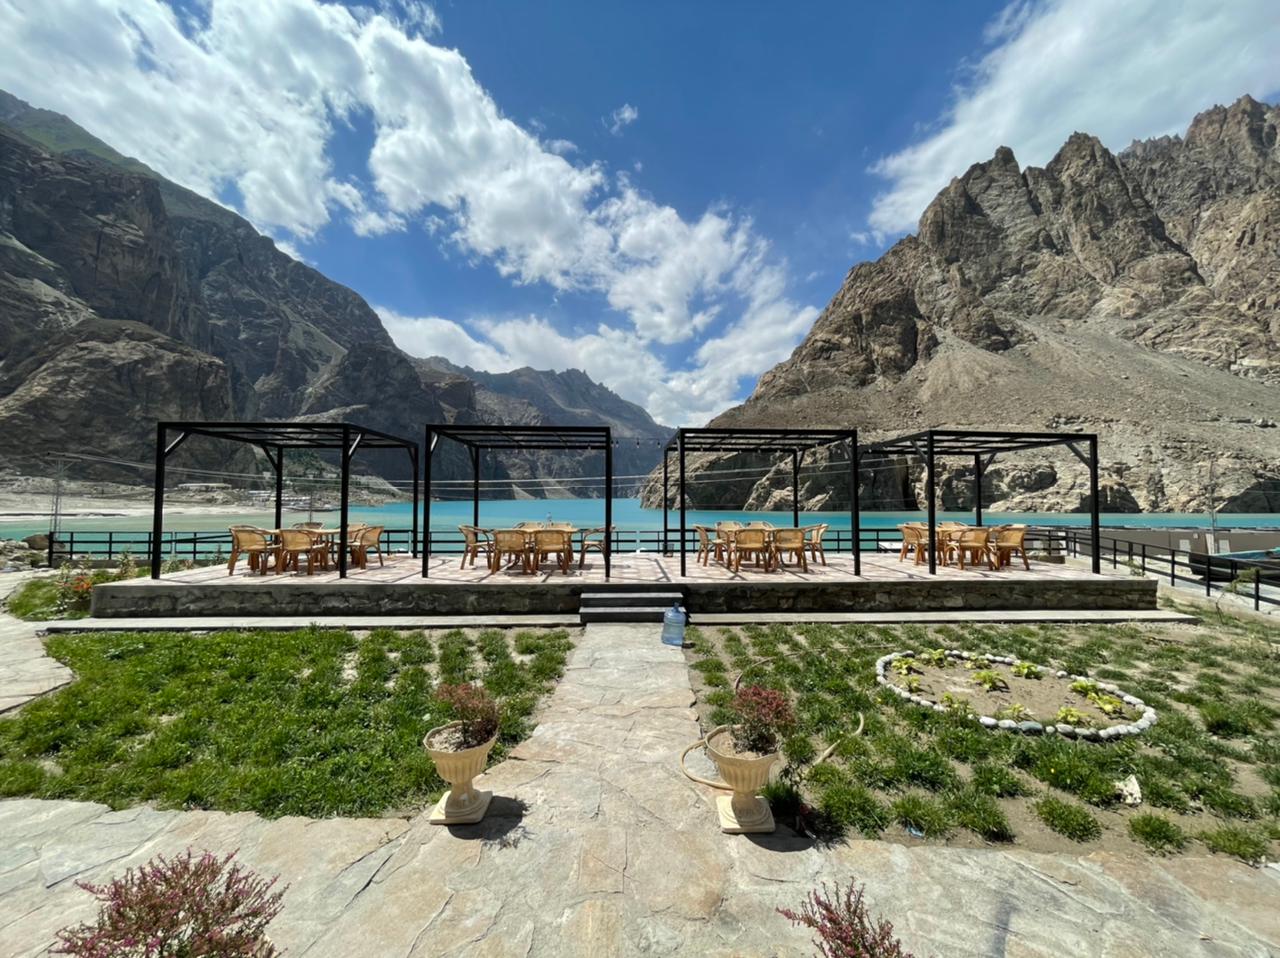 Luxus Alternate Hotel at Attabad - lounge wth view of attabad lake